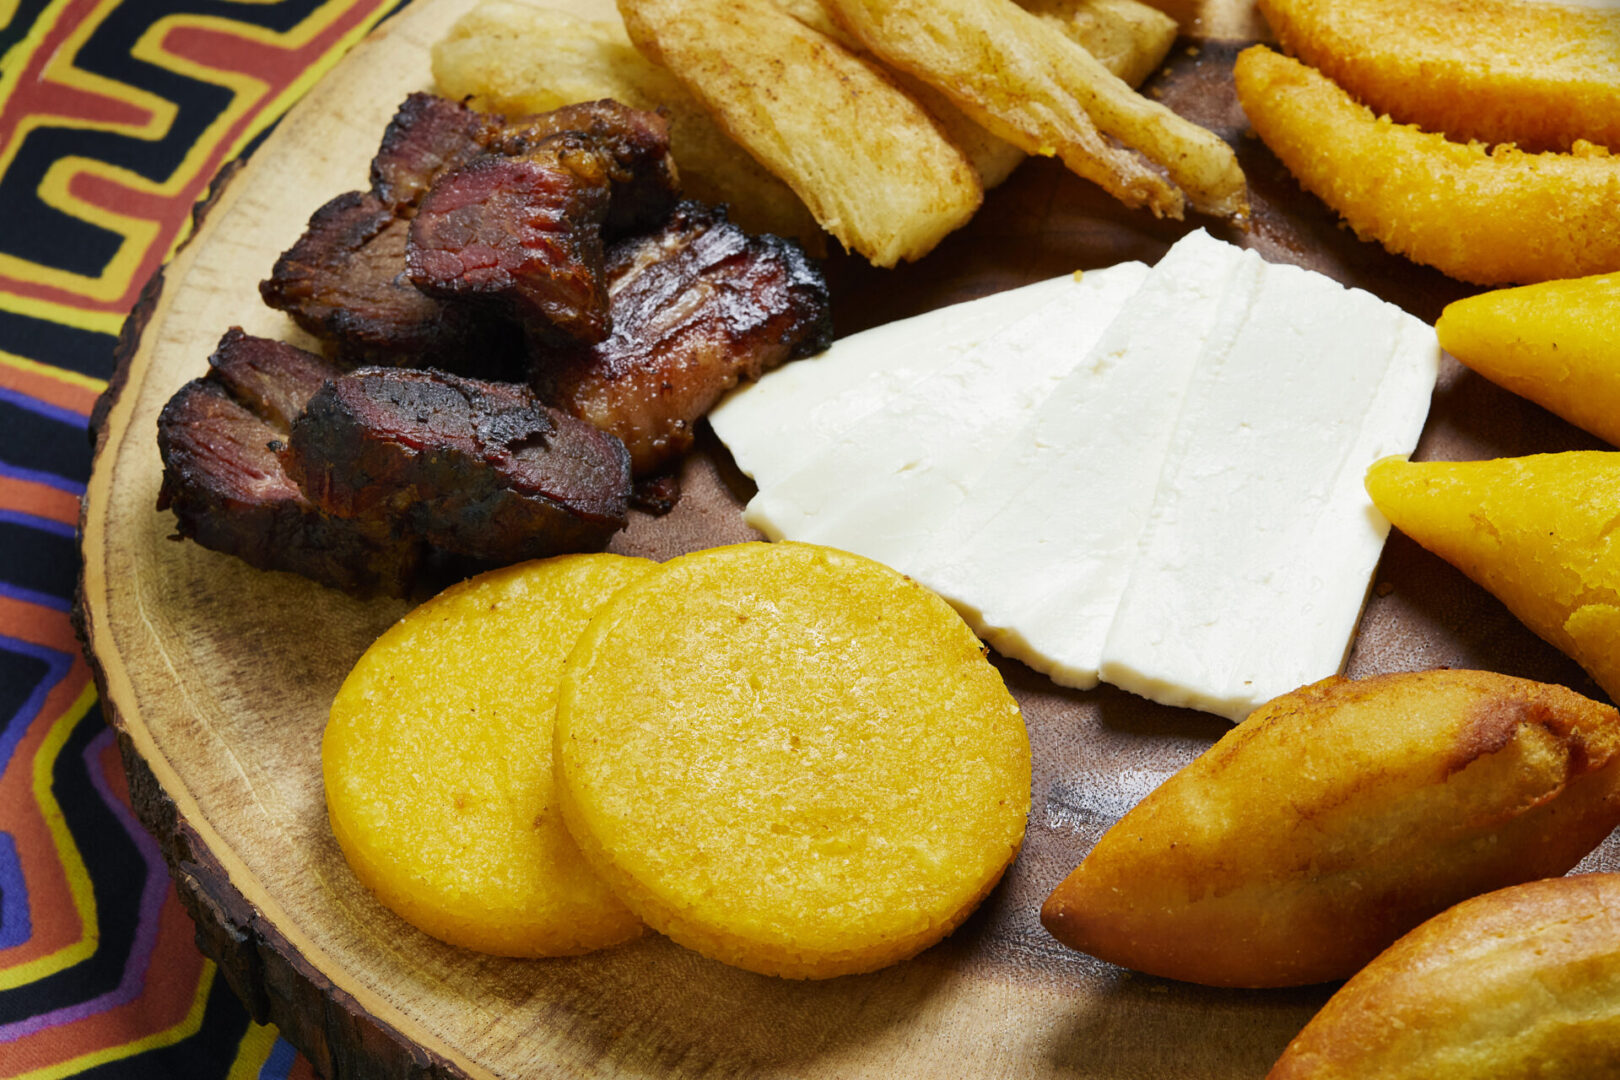 Roasted beef, cheese and wedges on a wooden plate